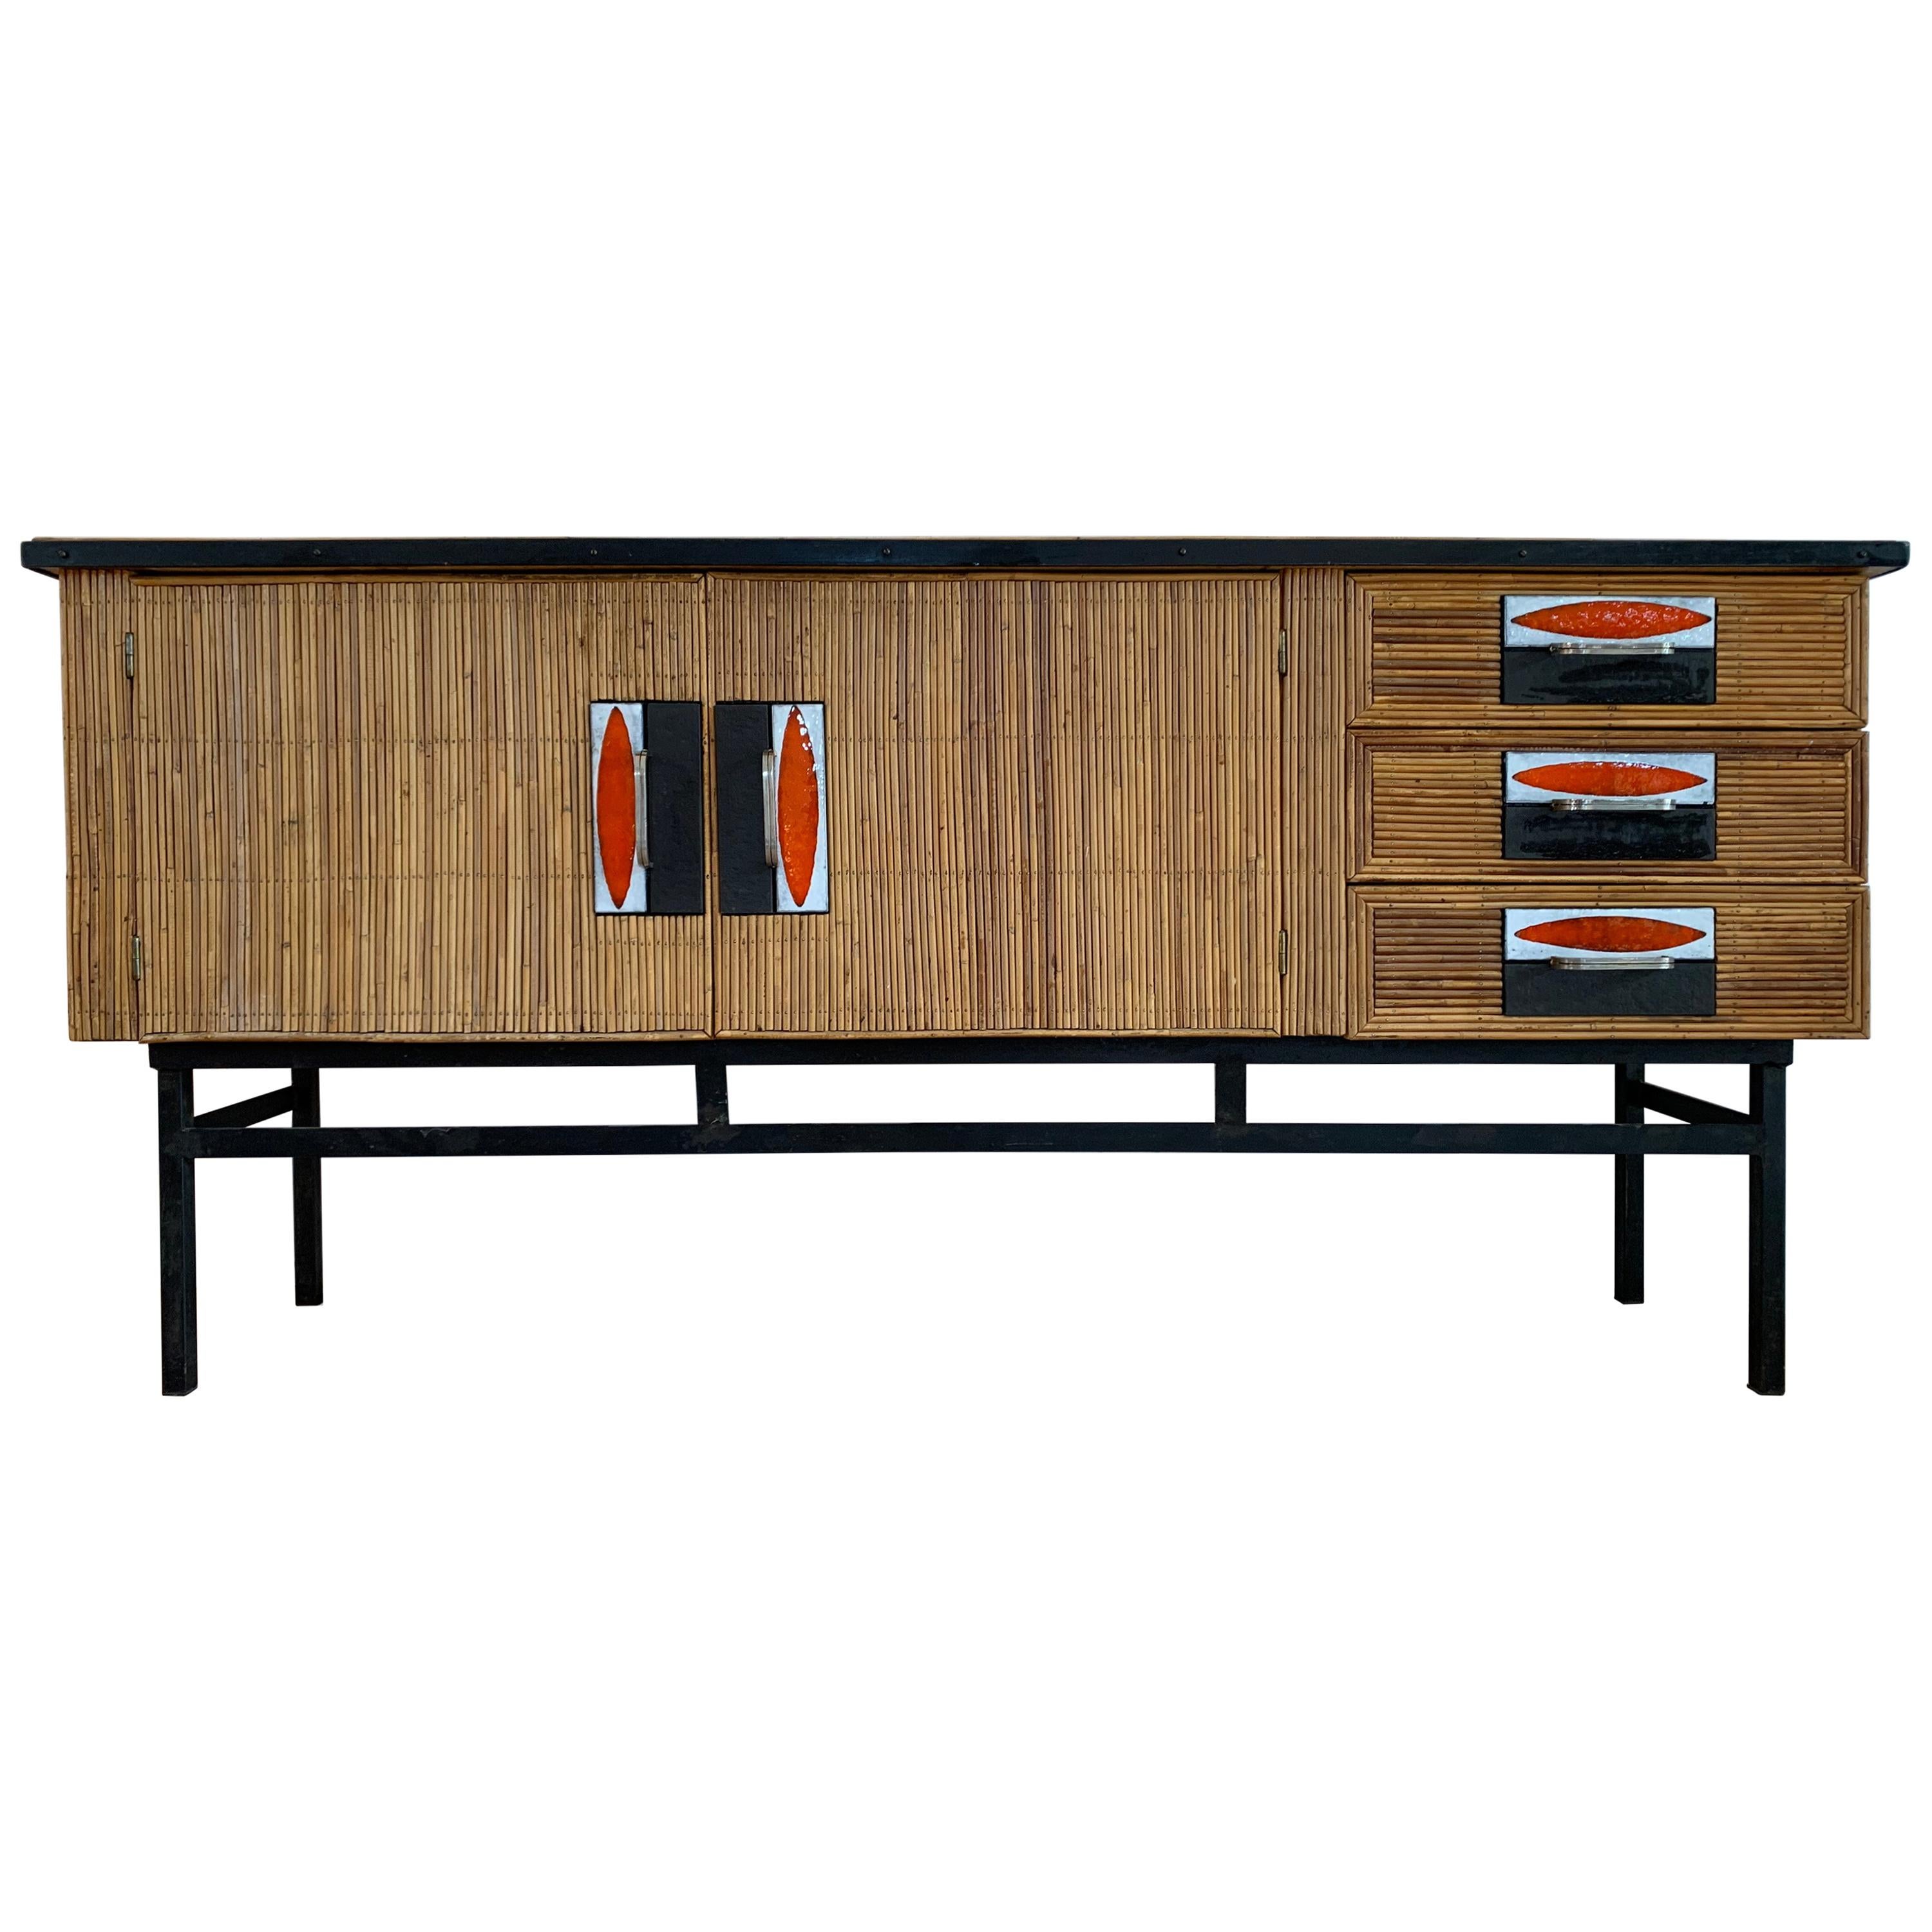 Audoux & Minet with Roger Capron Ceramic Tiles Sideboard in Rattan & metal, 1950